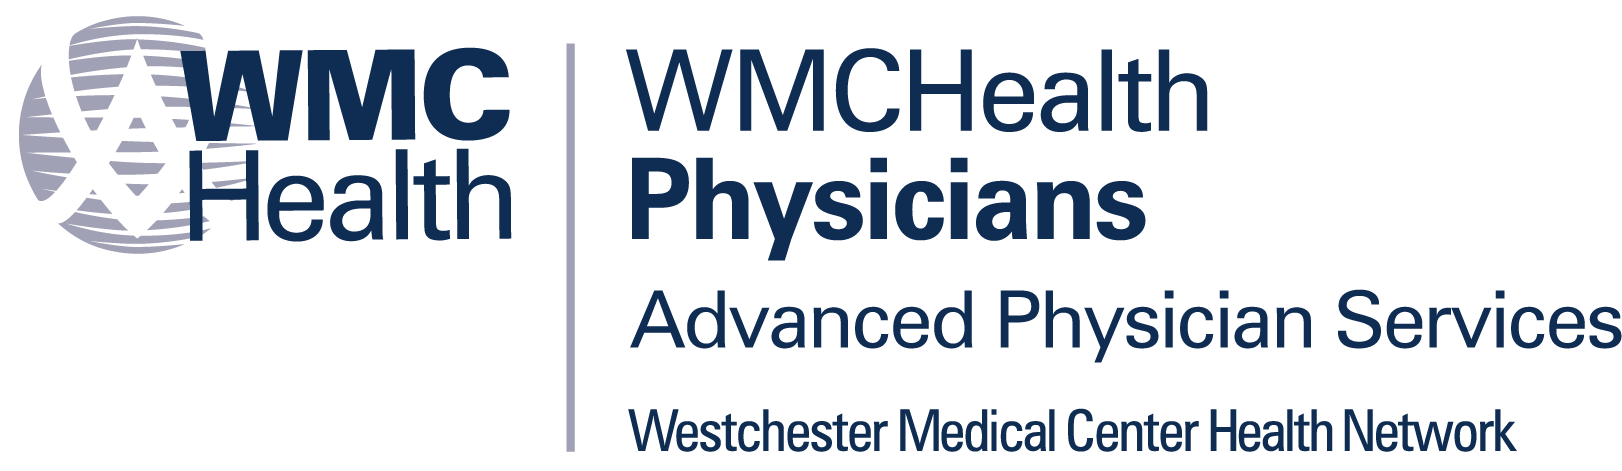 Advanced Physician Services